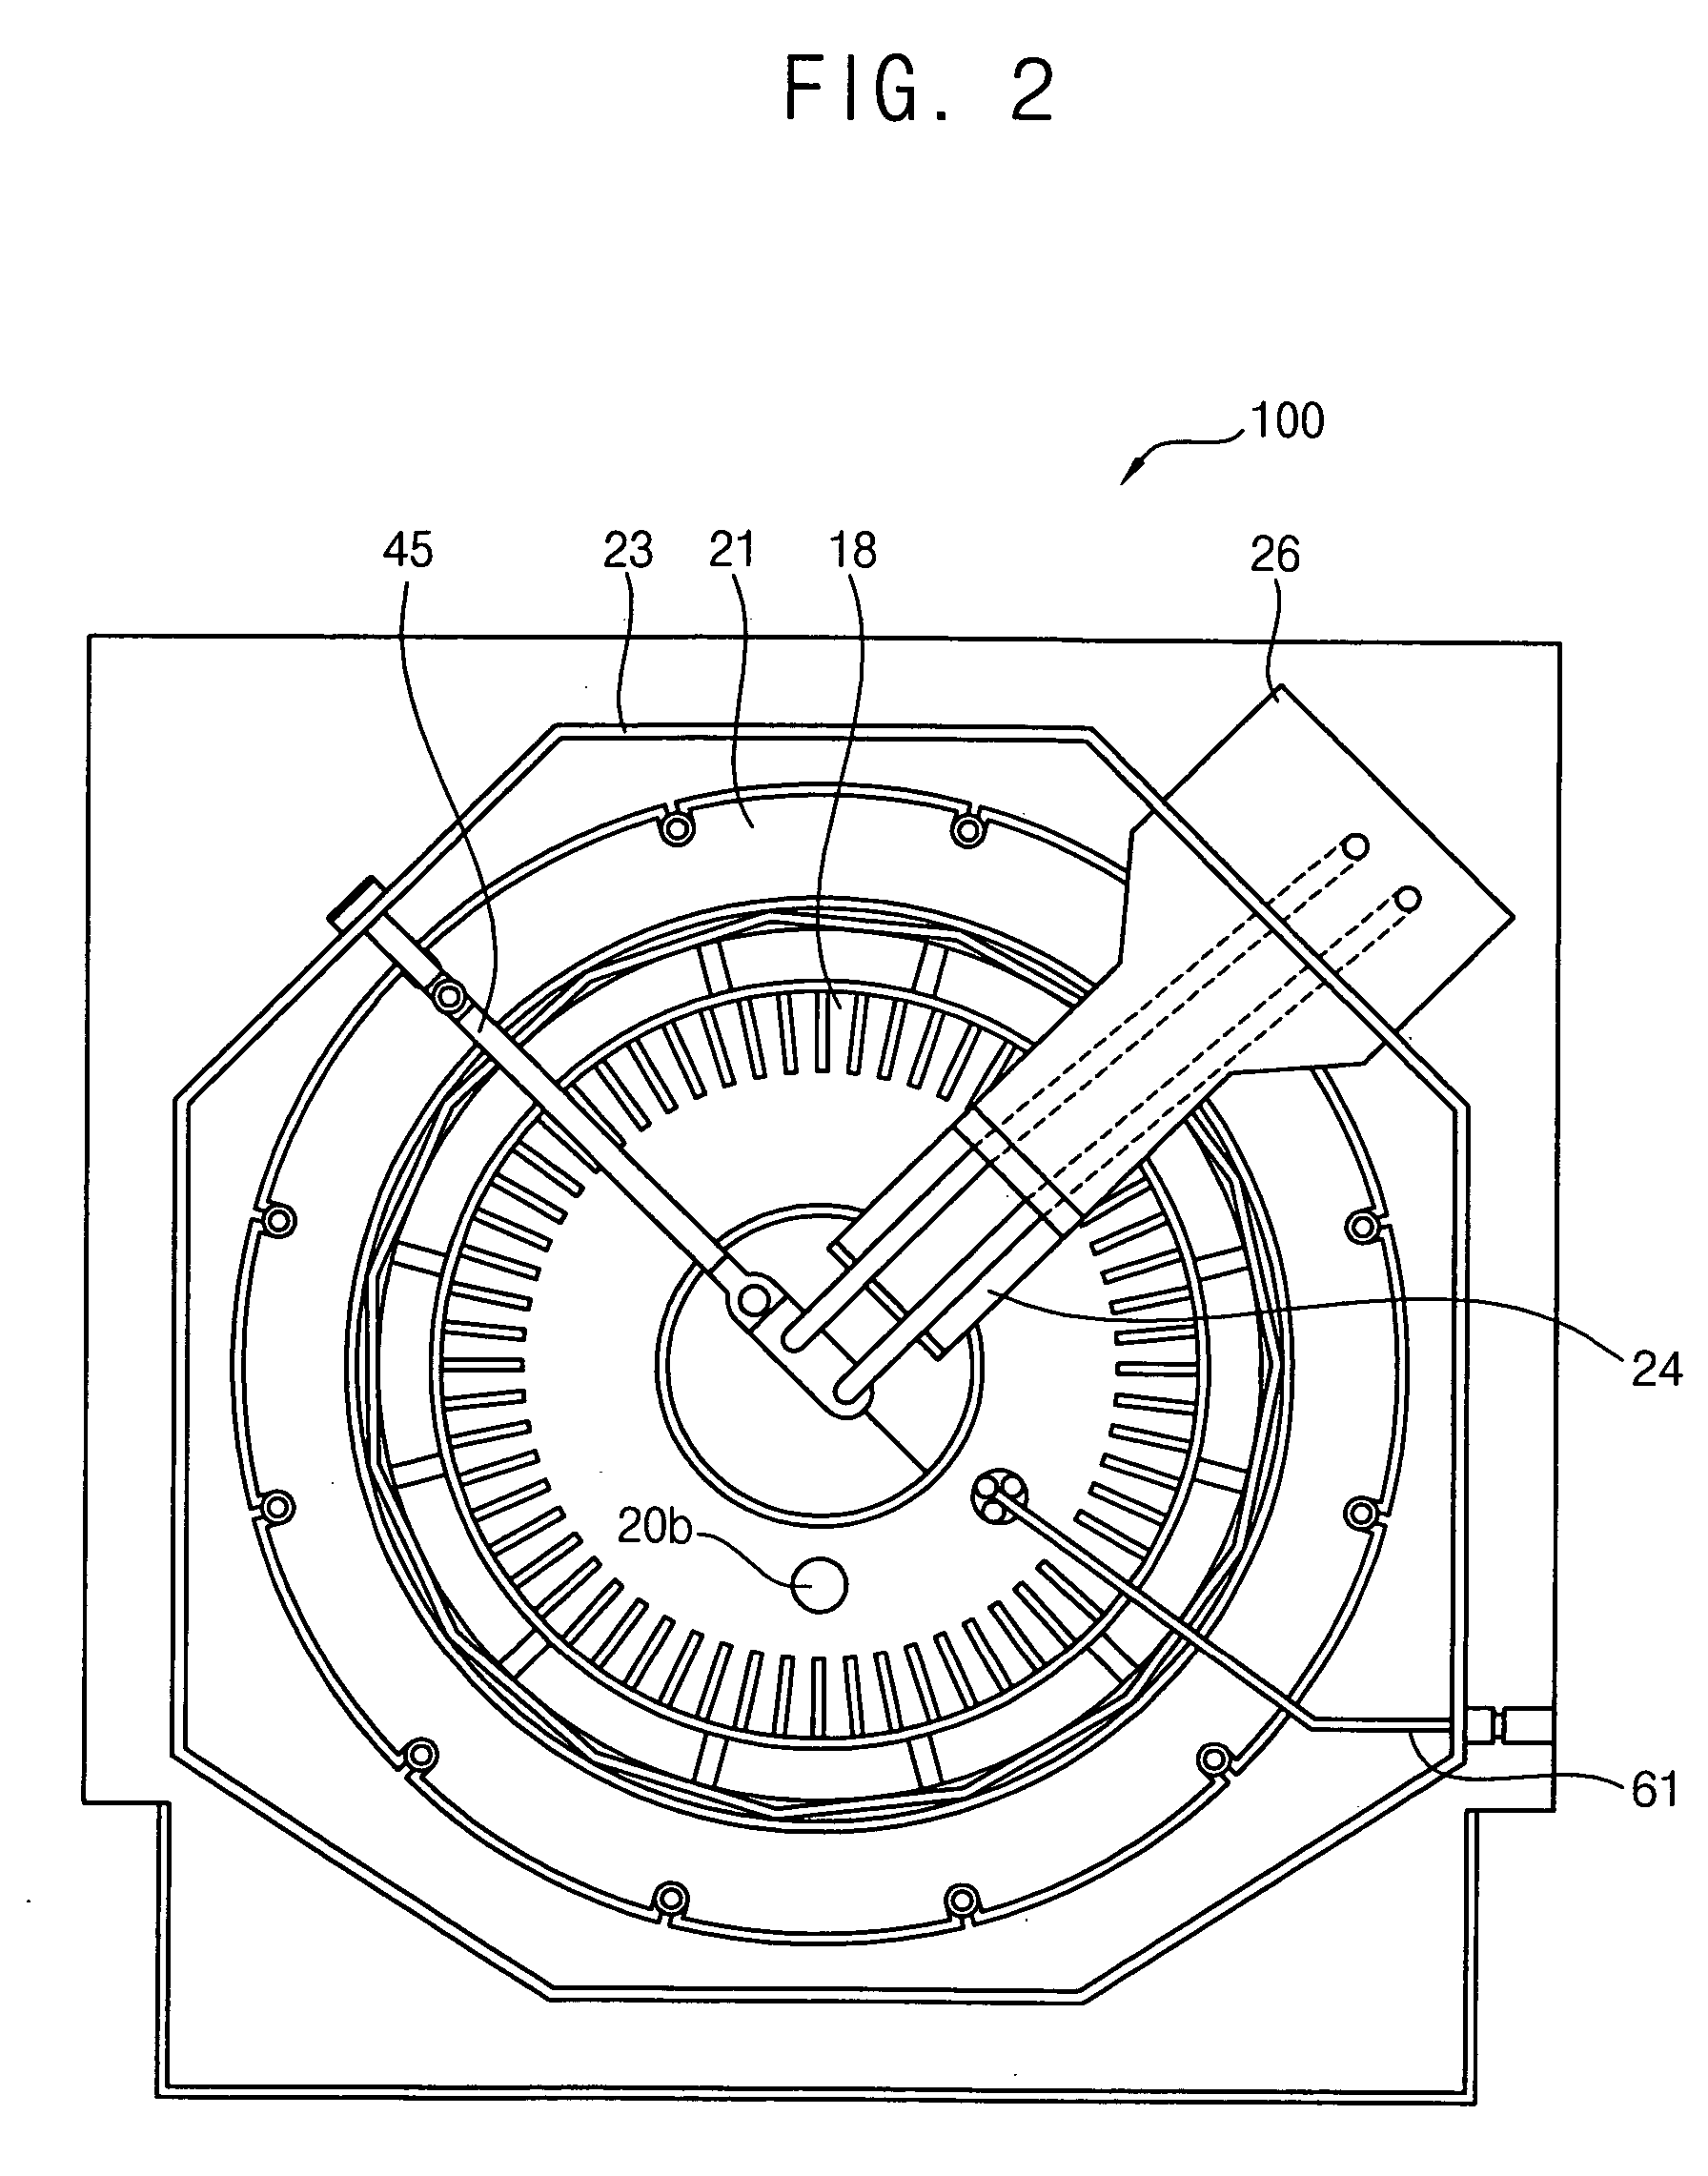 Combination of showerhead and temperature control means for controlling the temperature of the showerhead, and deposition apparatus having the same